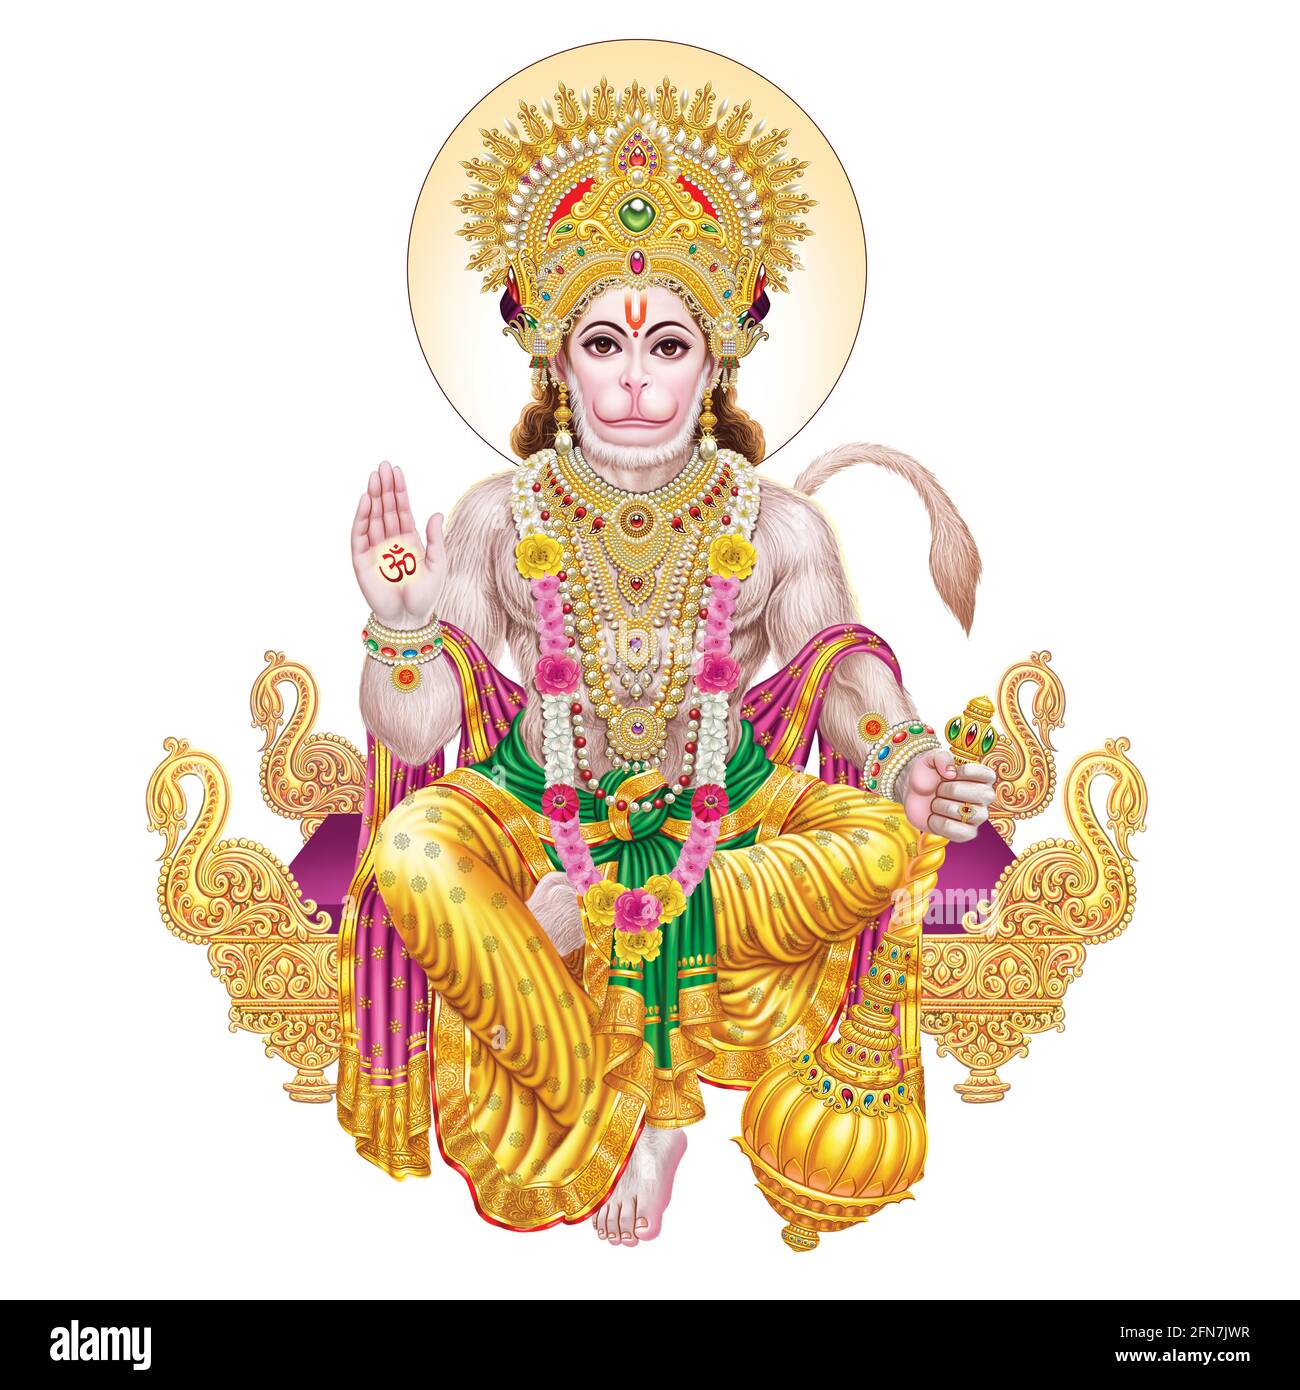 High-resolution stock photography of Lord Hanuman from a house of creative art for printing industry. Stock Photo